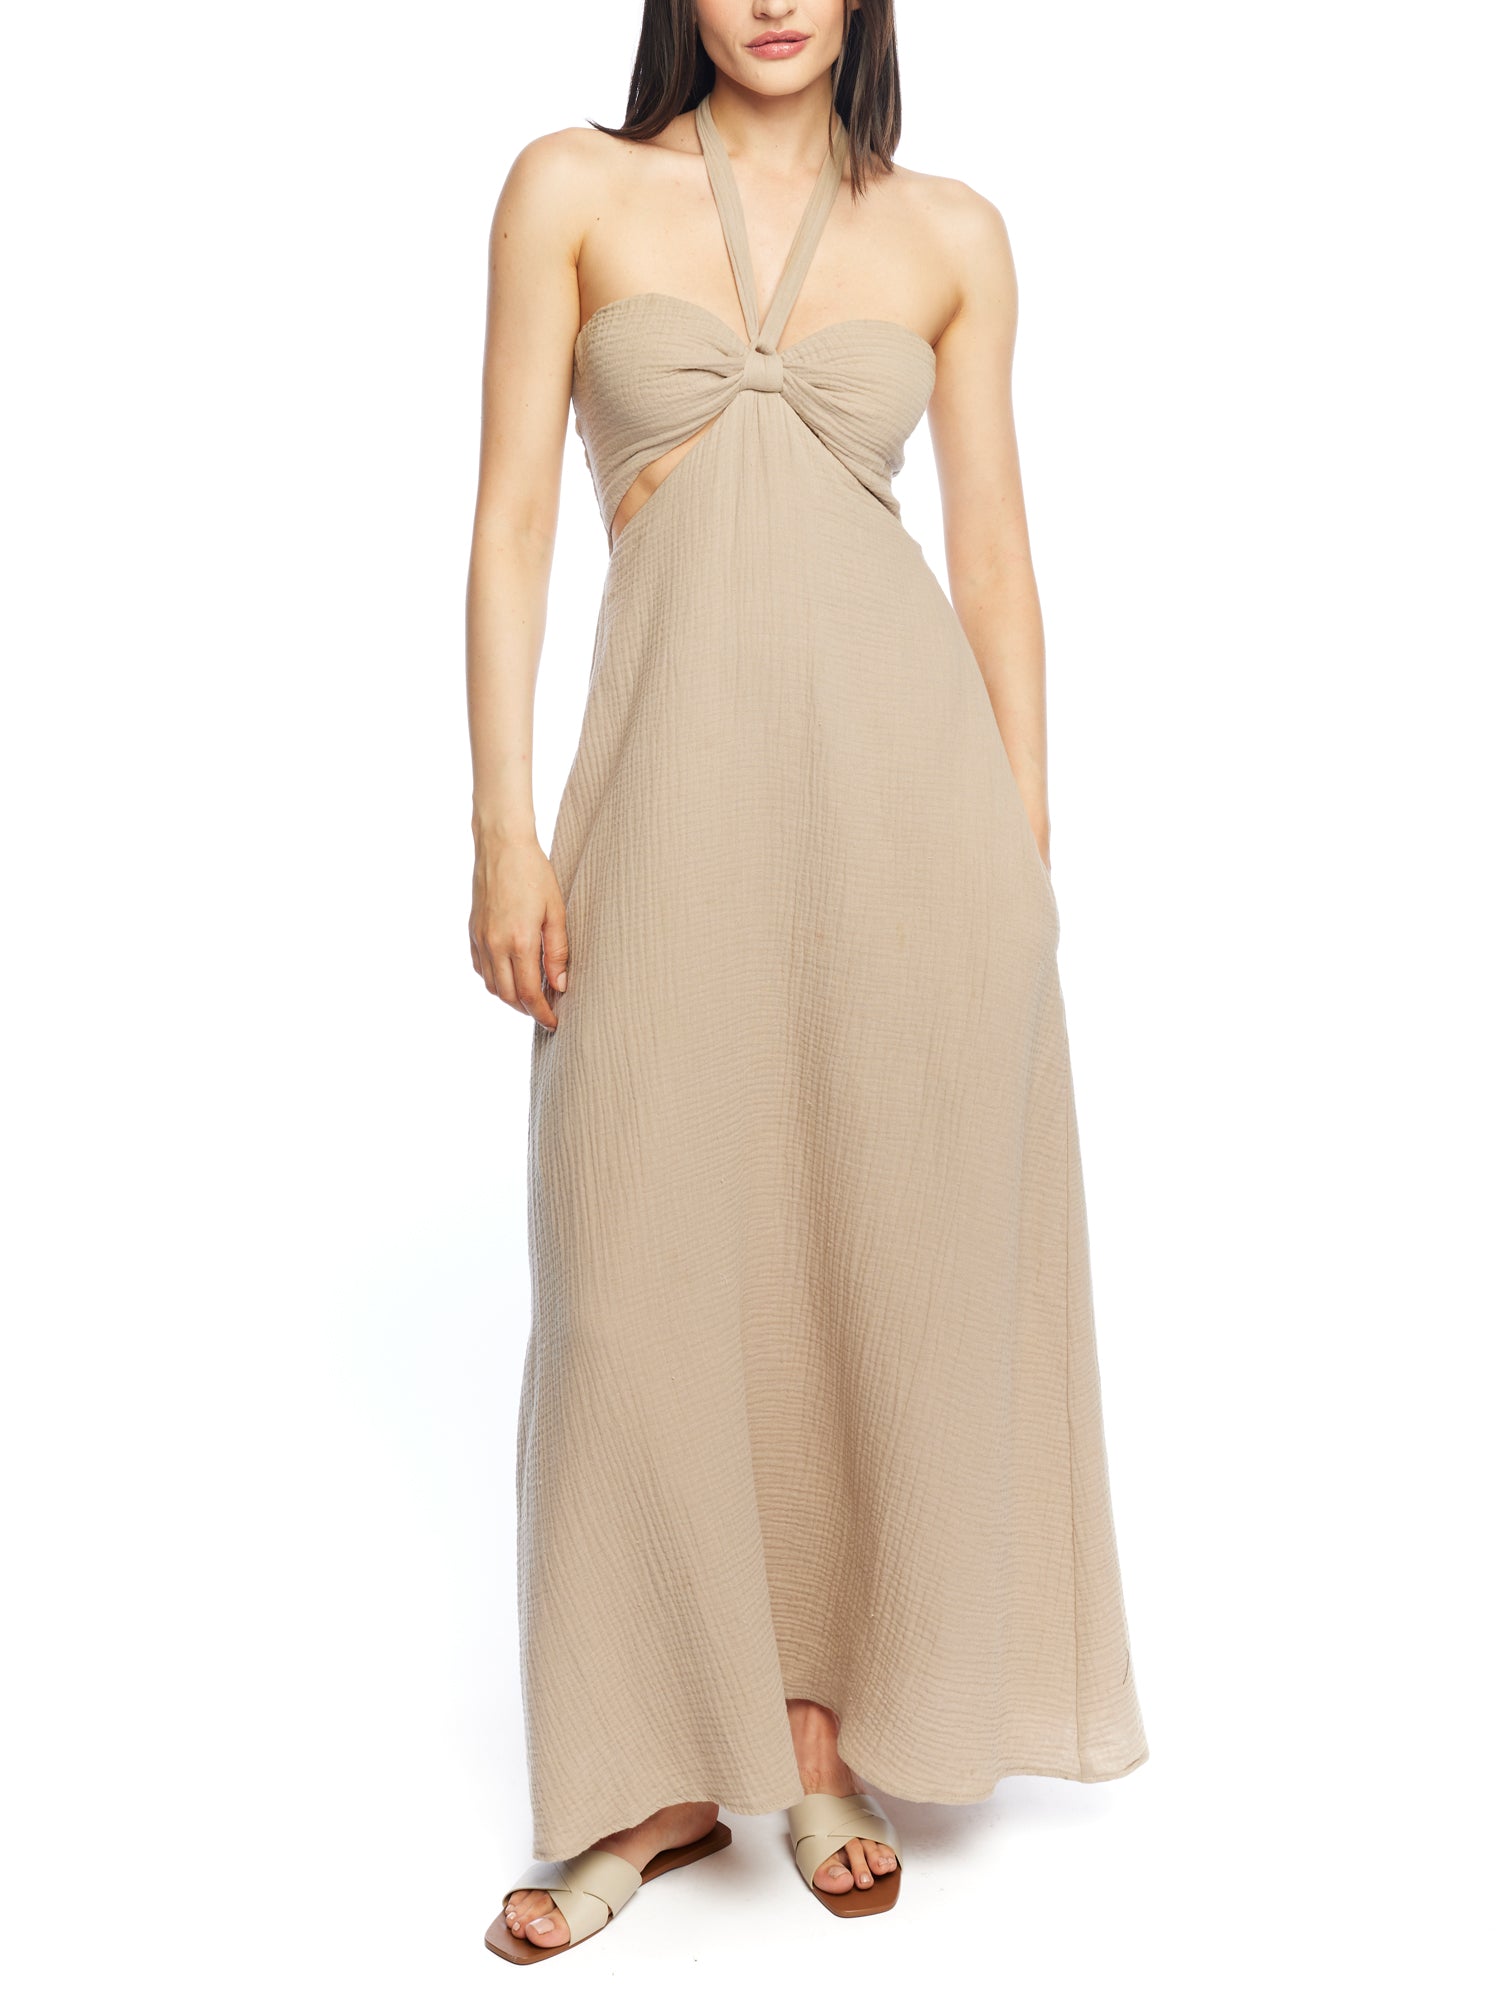 Maxi halter dress with cinched front, tie neck, under bust/side cutouts, smocked back and pockets in mocha